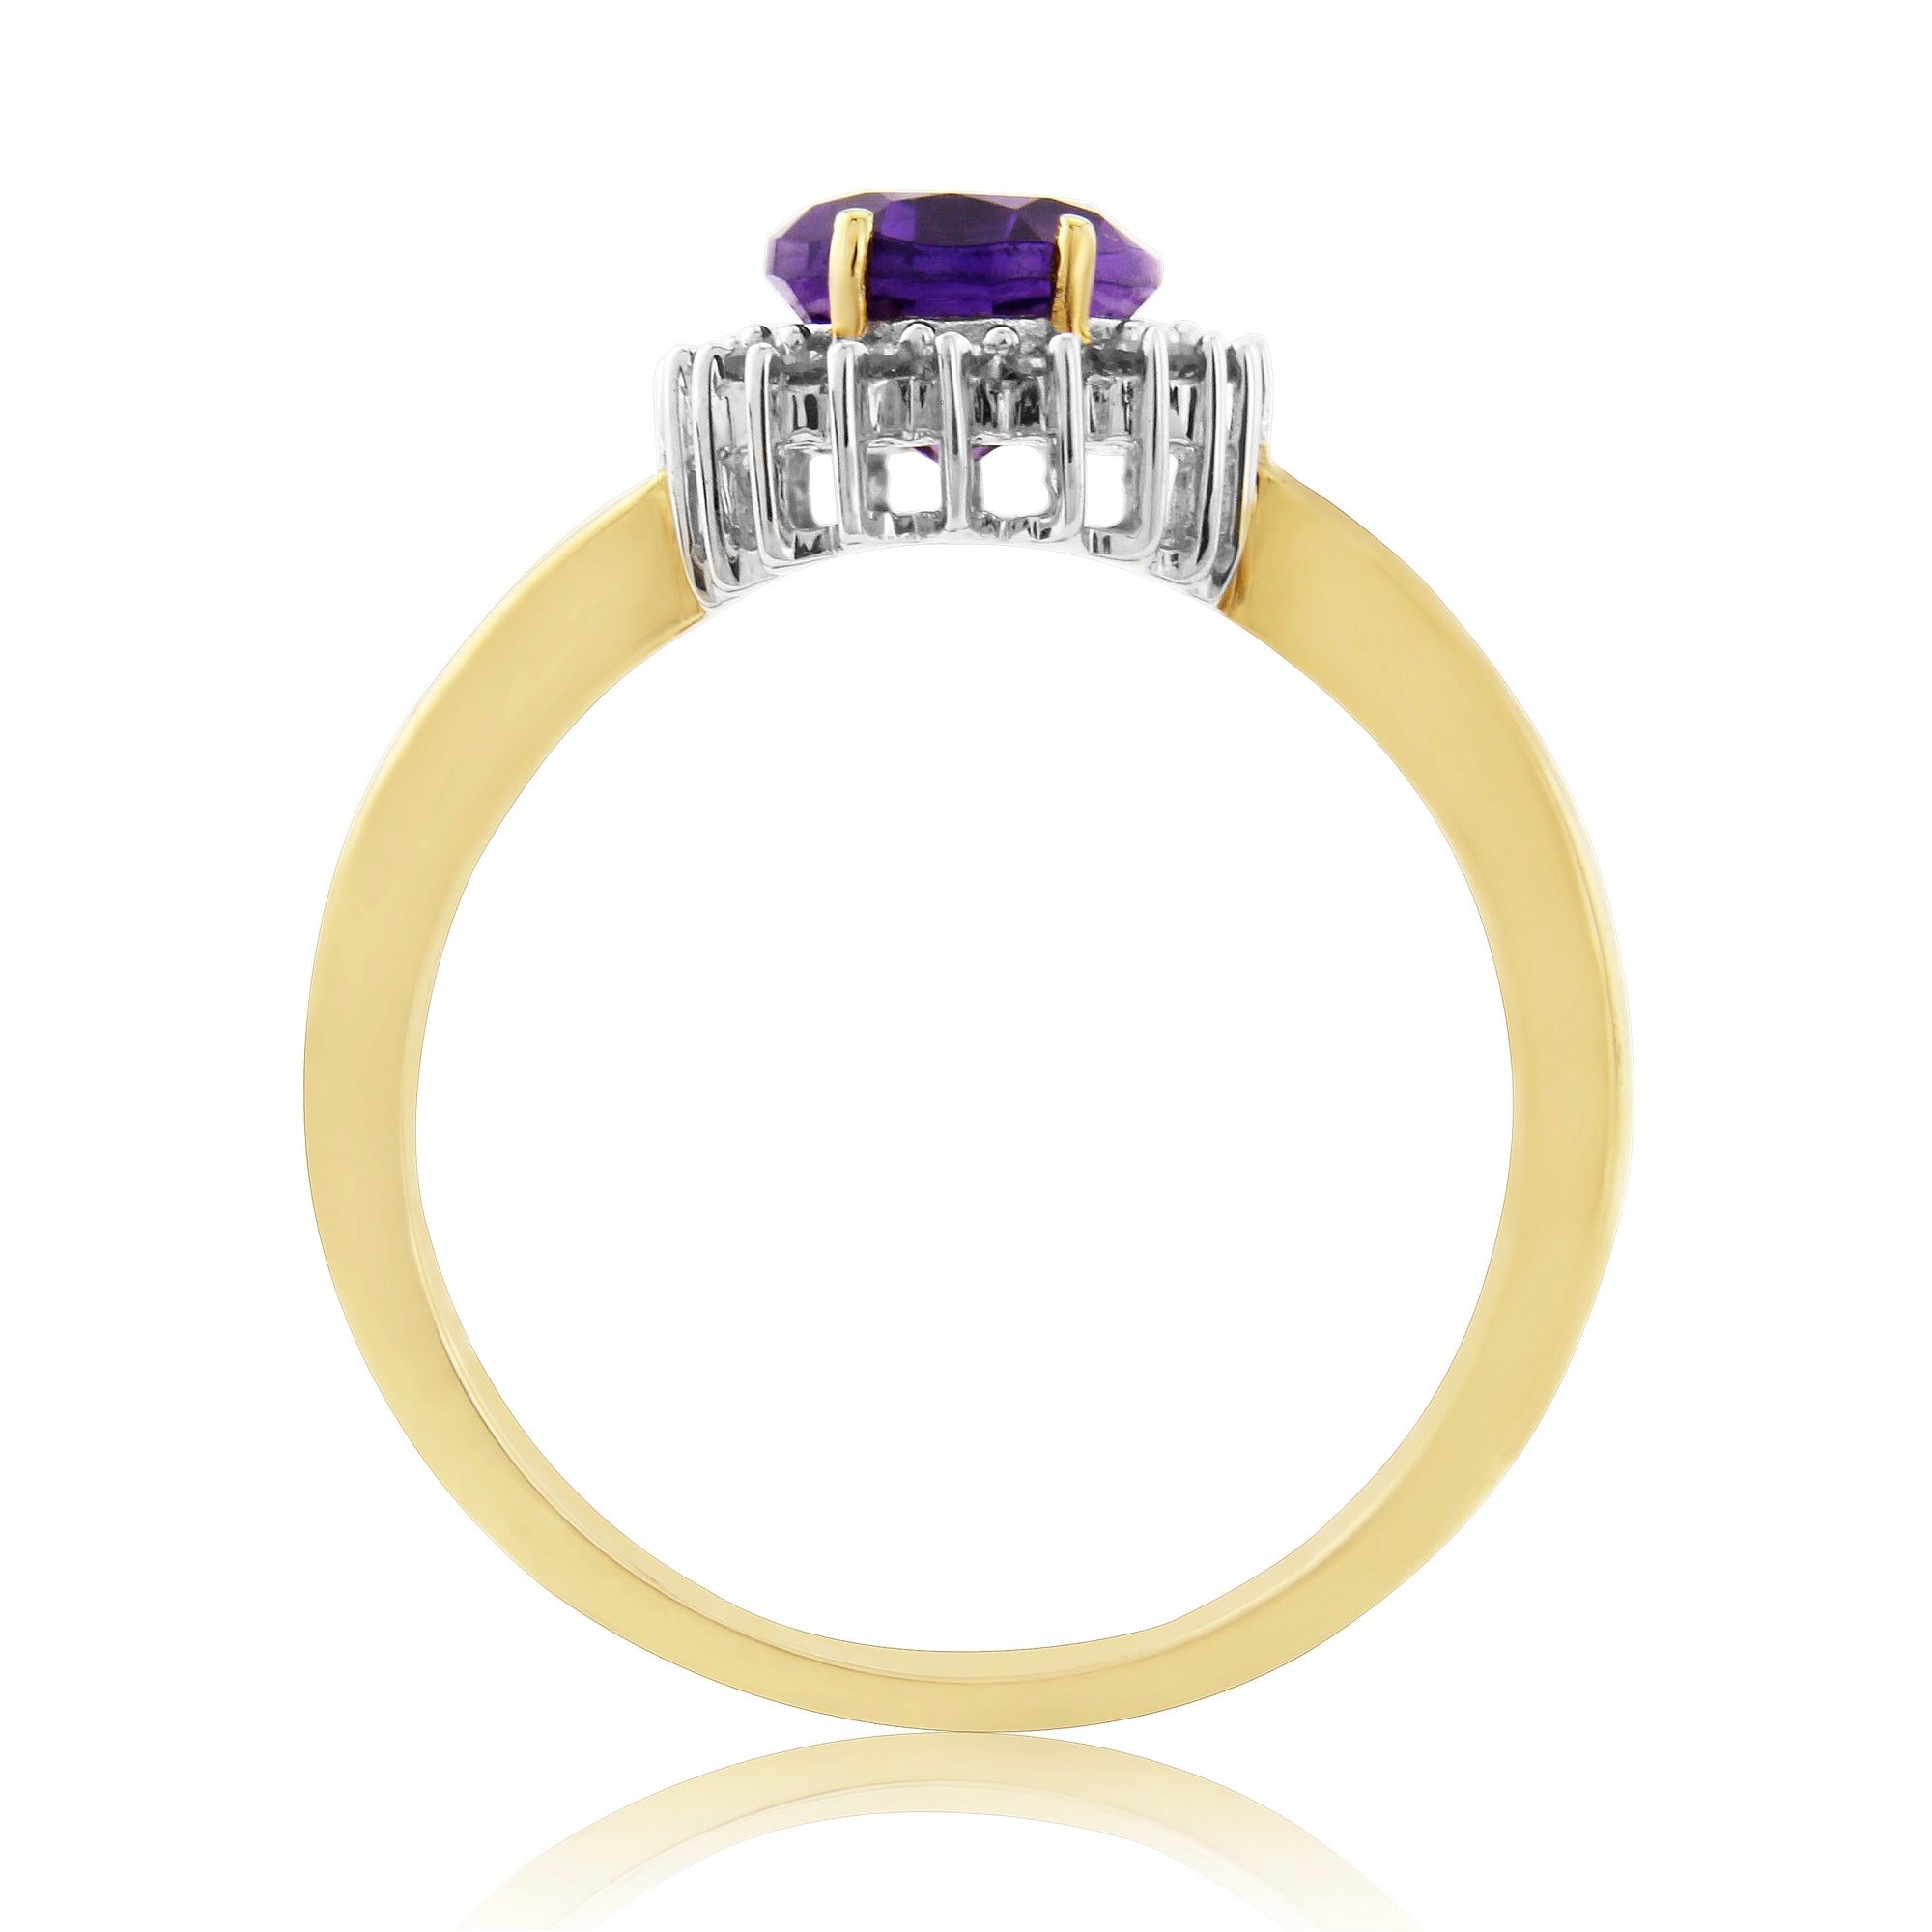 9ct gold 8x6mm oval amethyst & diamond cluster ring 0.15ct